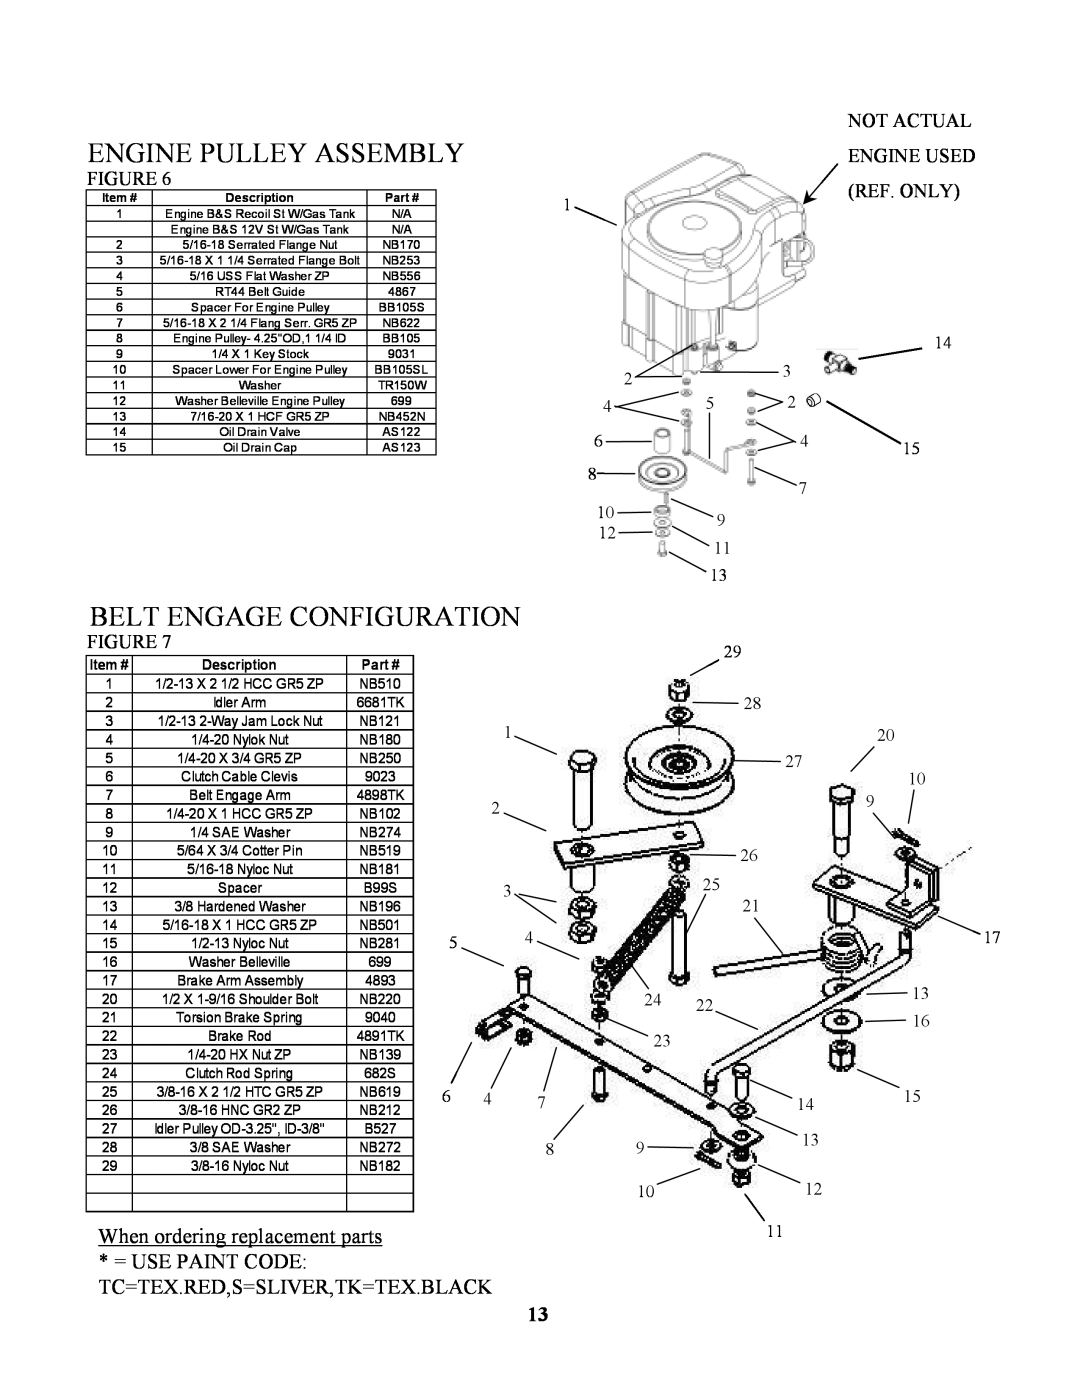 Swisher RTB105441, POLB10544HD, RTB1254412V Engine Pulley Assembly, Belt Engage Configuration, Not Actual, Ref. Only 